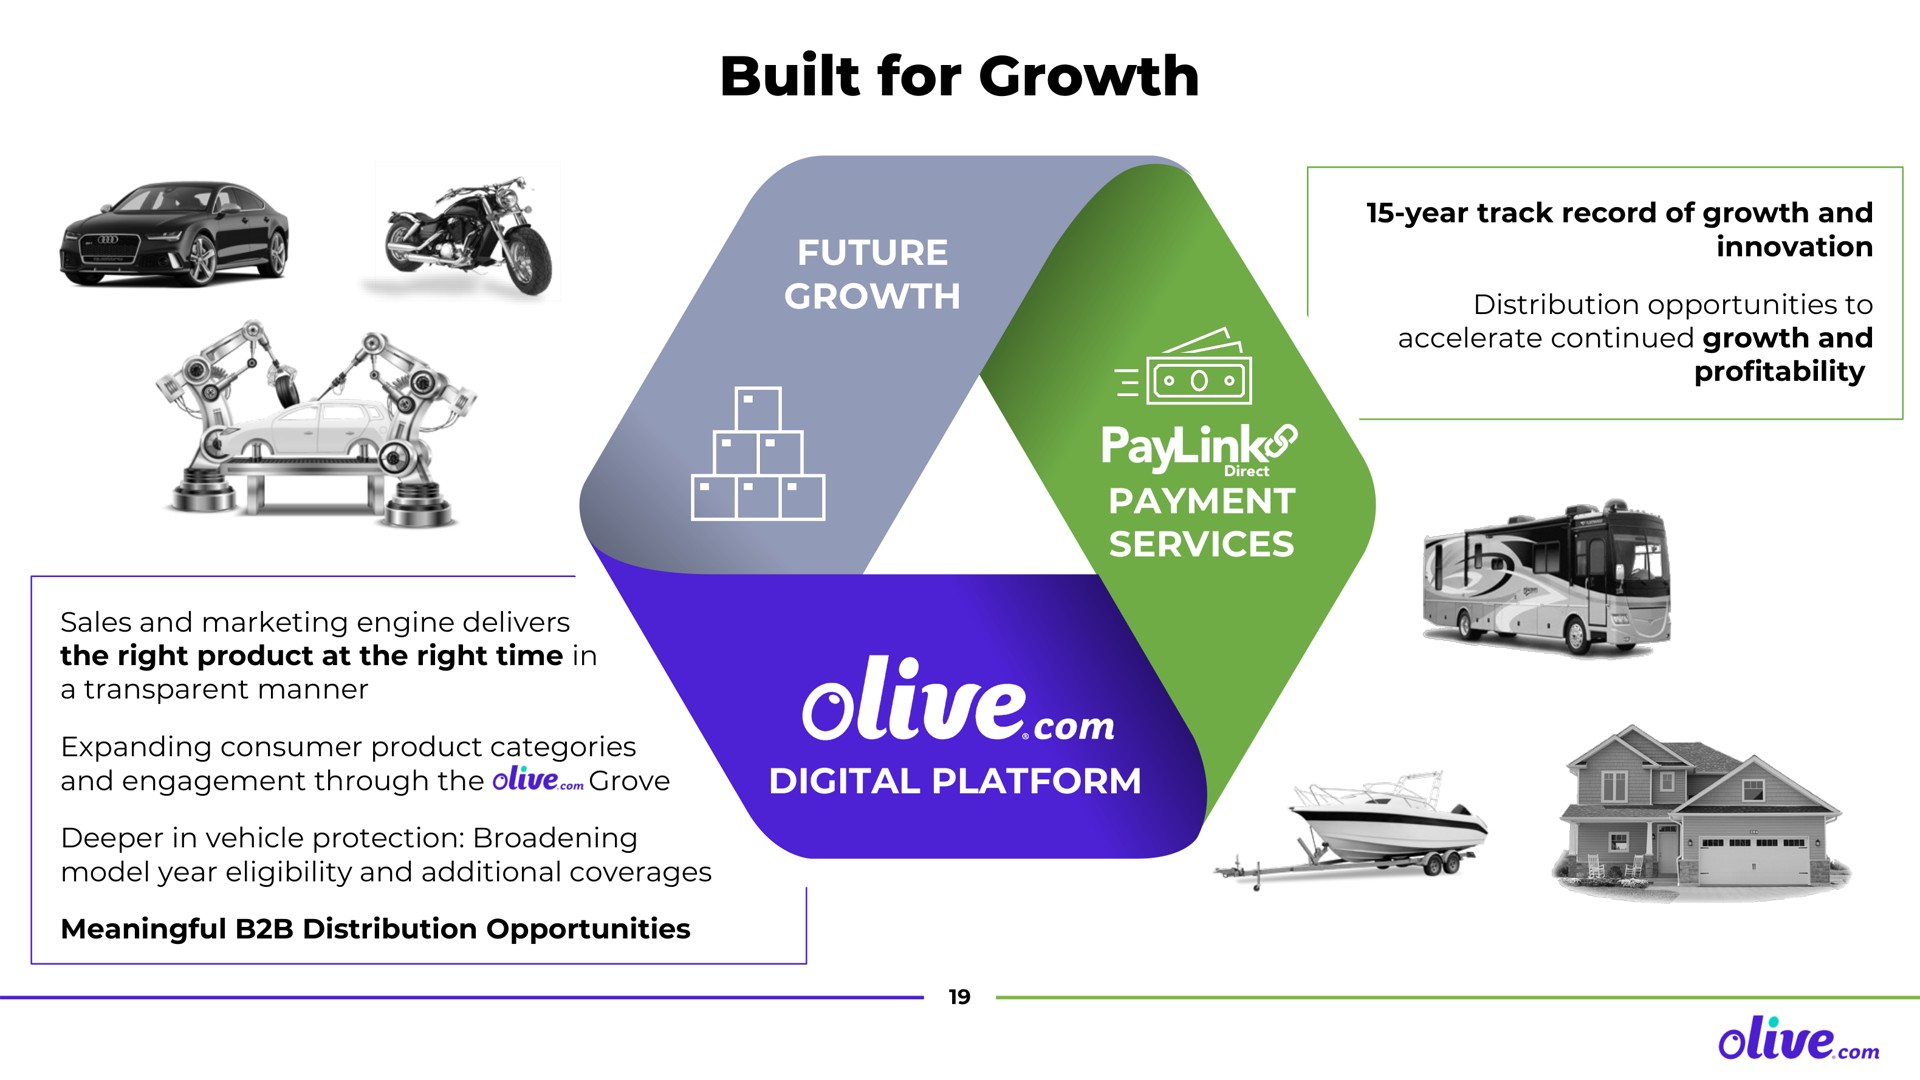 built for growth olive con | Olive.com